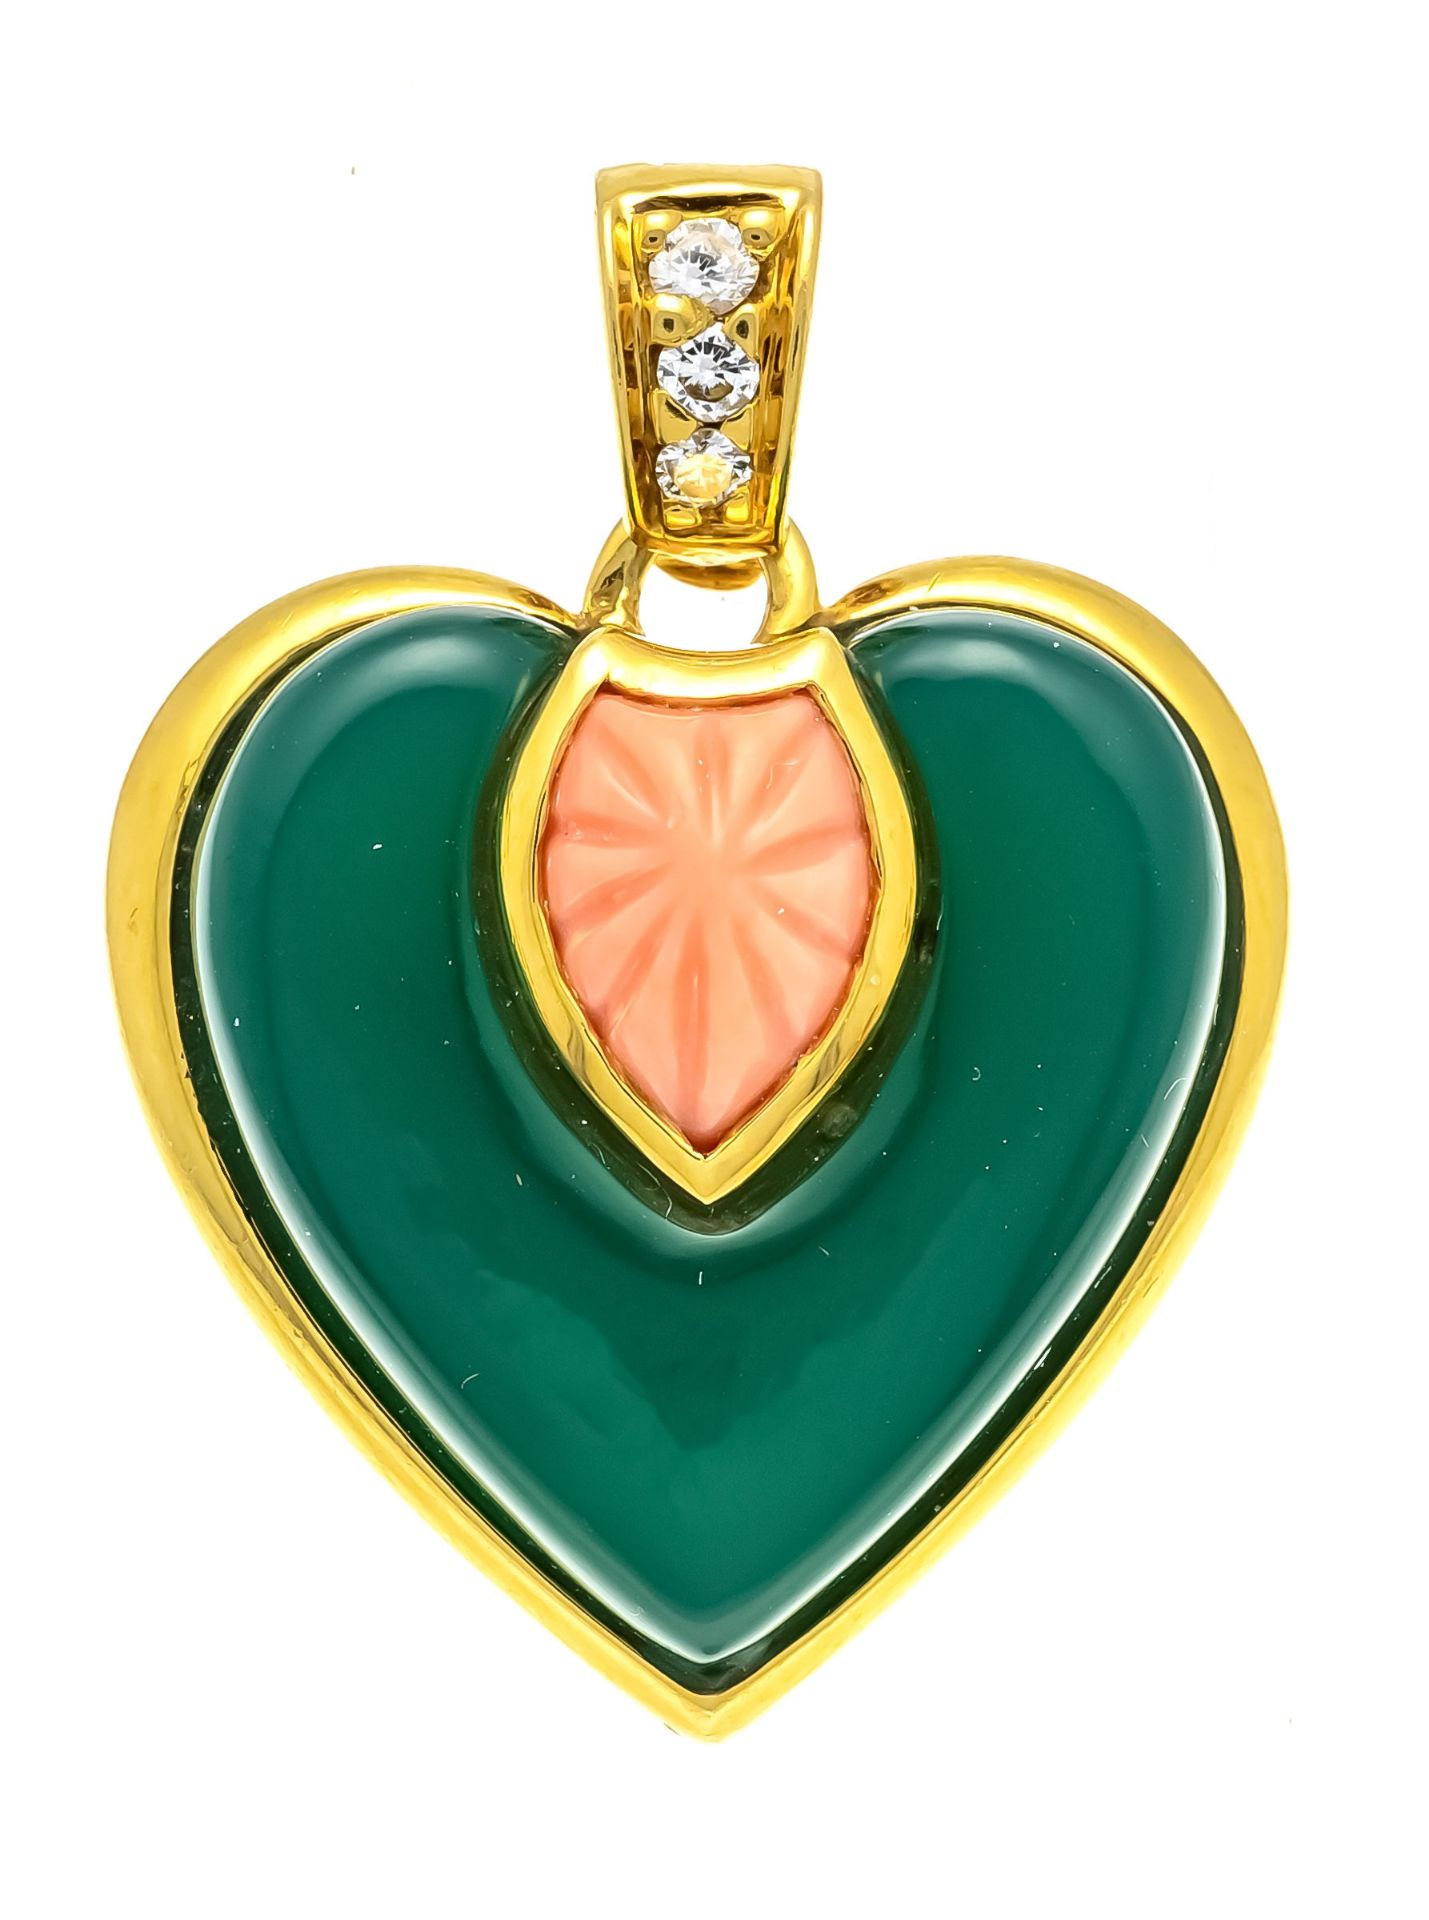 CARTIER jade-coral diamond clip pendant GG 750/000 with a jade heart, cut coral drop and 3